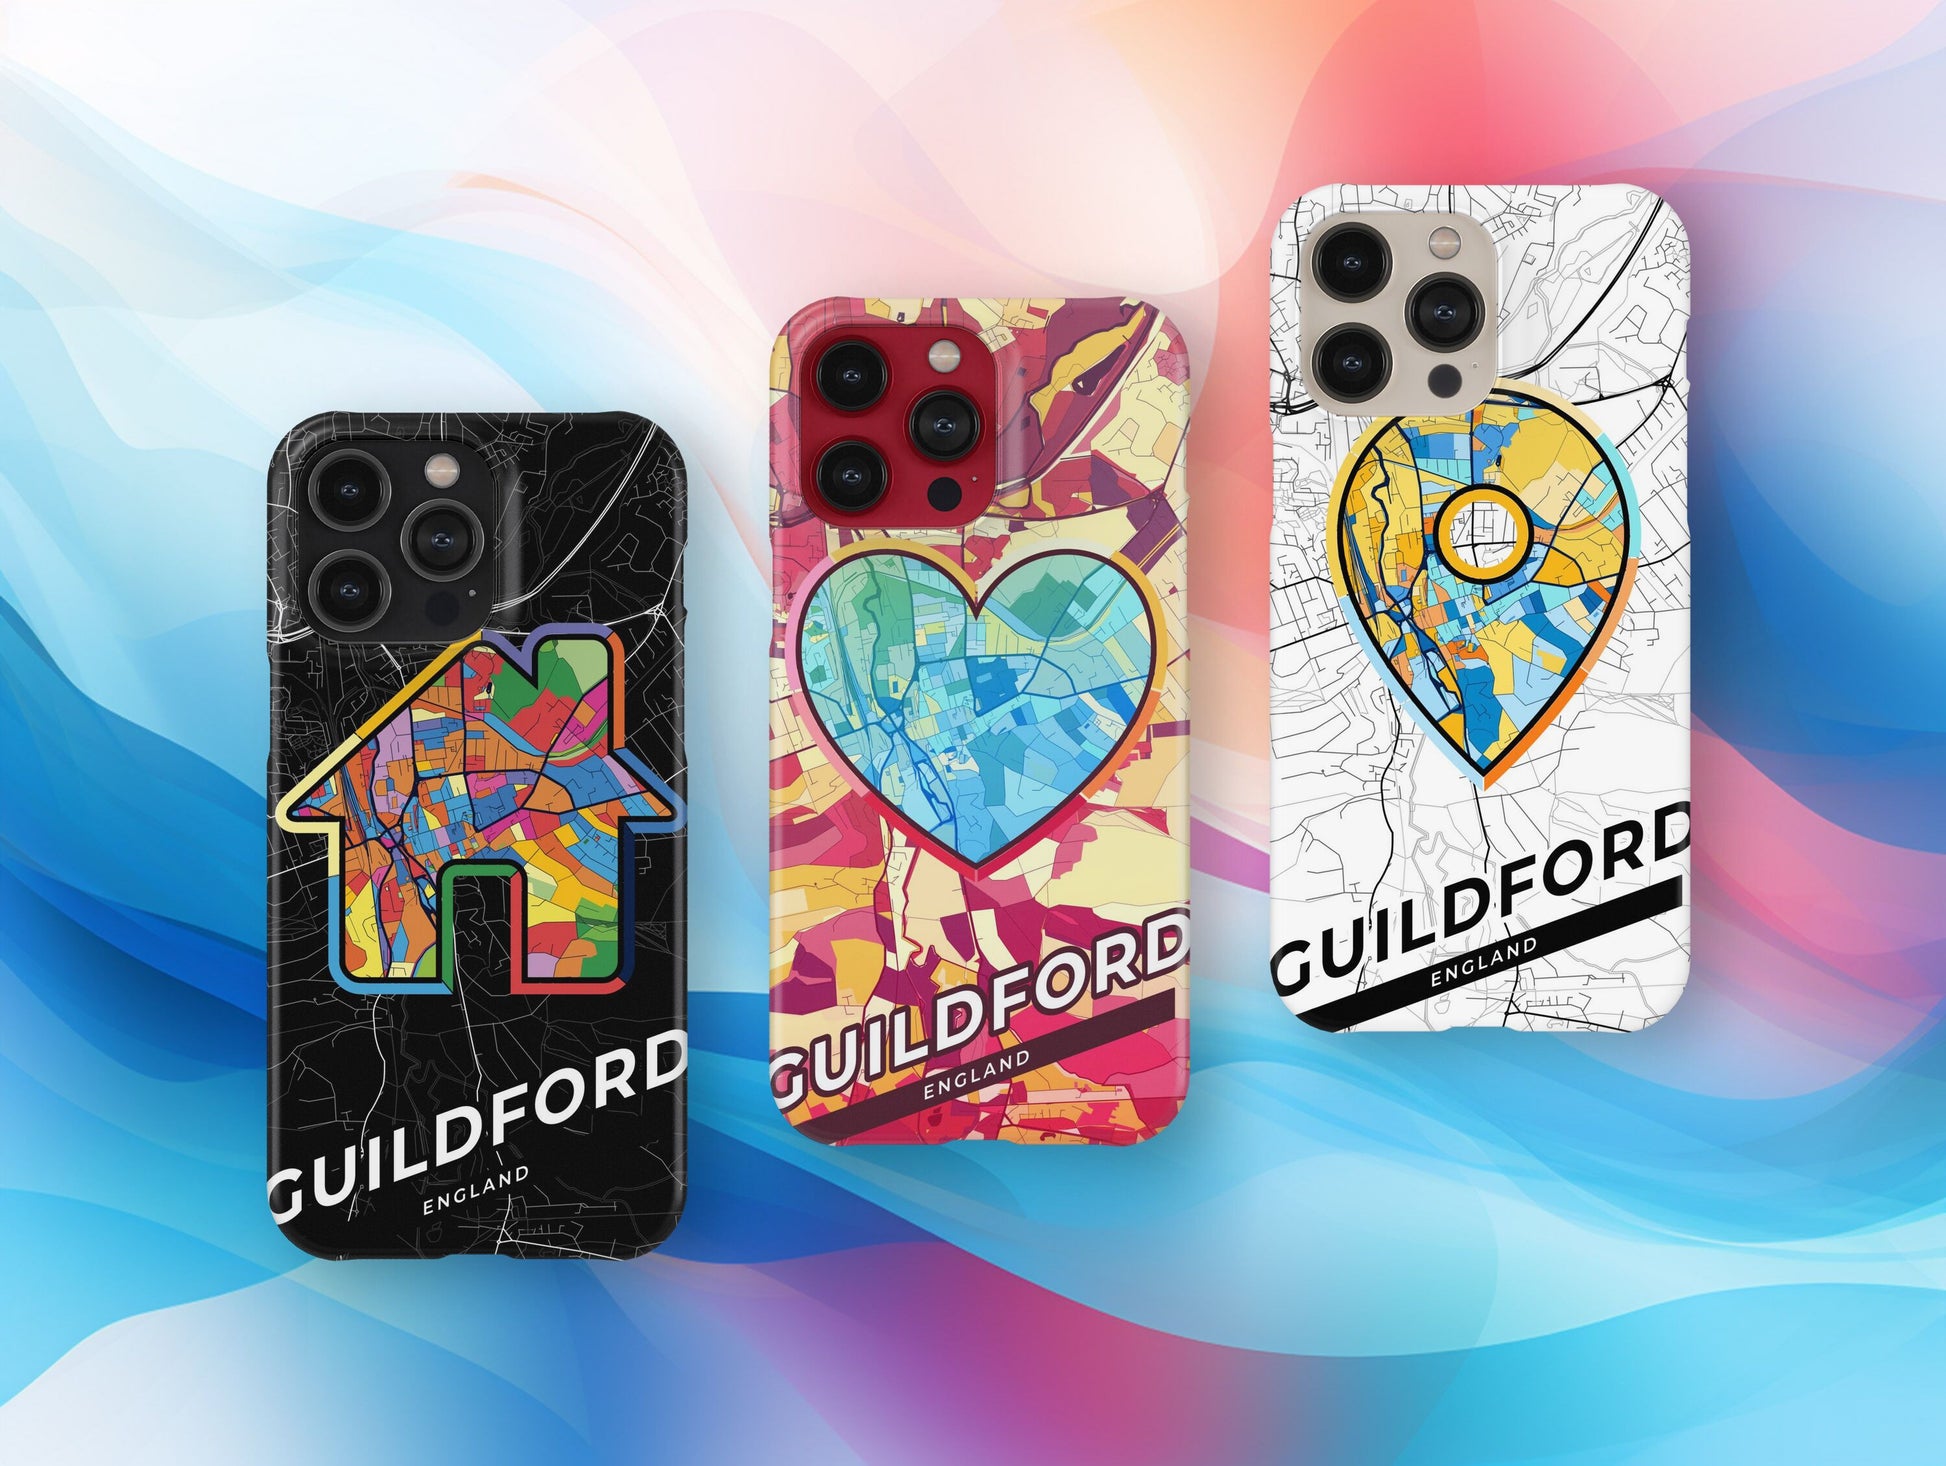 Guildford England slim phone case with colorful icon. Birthday, wedding or housewarming gift. Couple match cases.